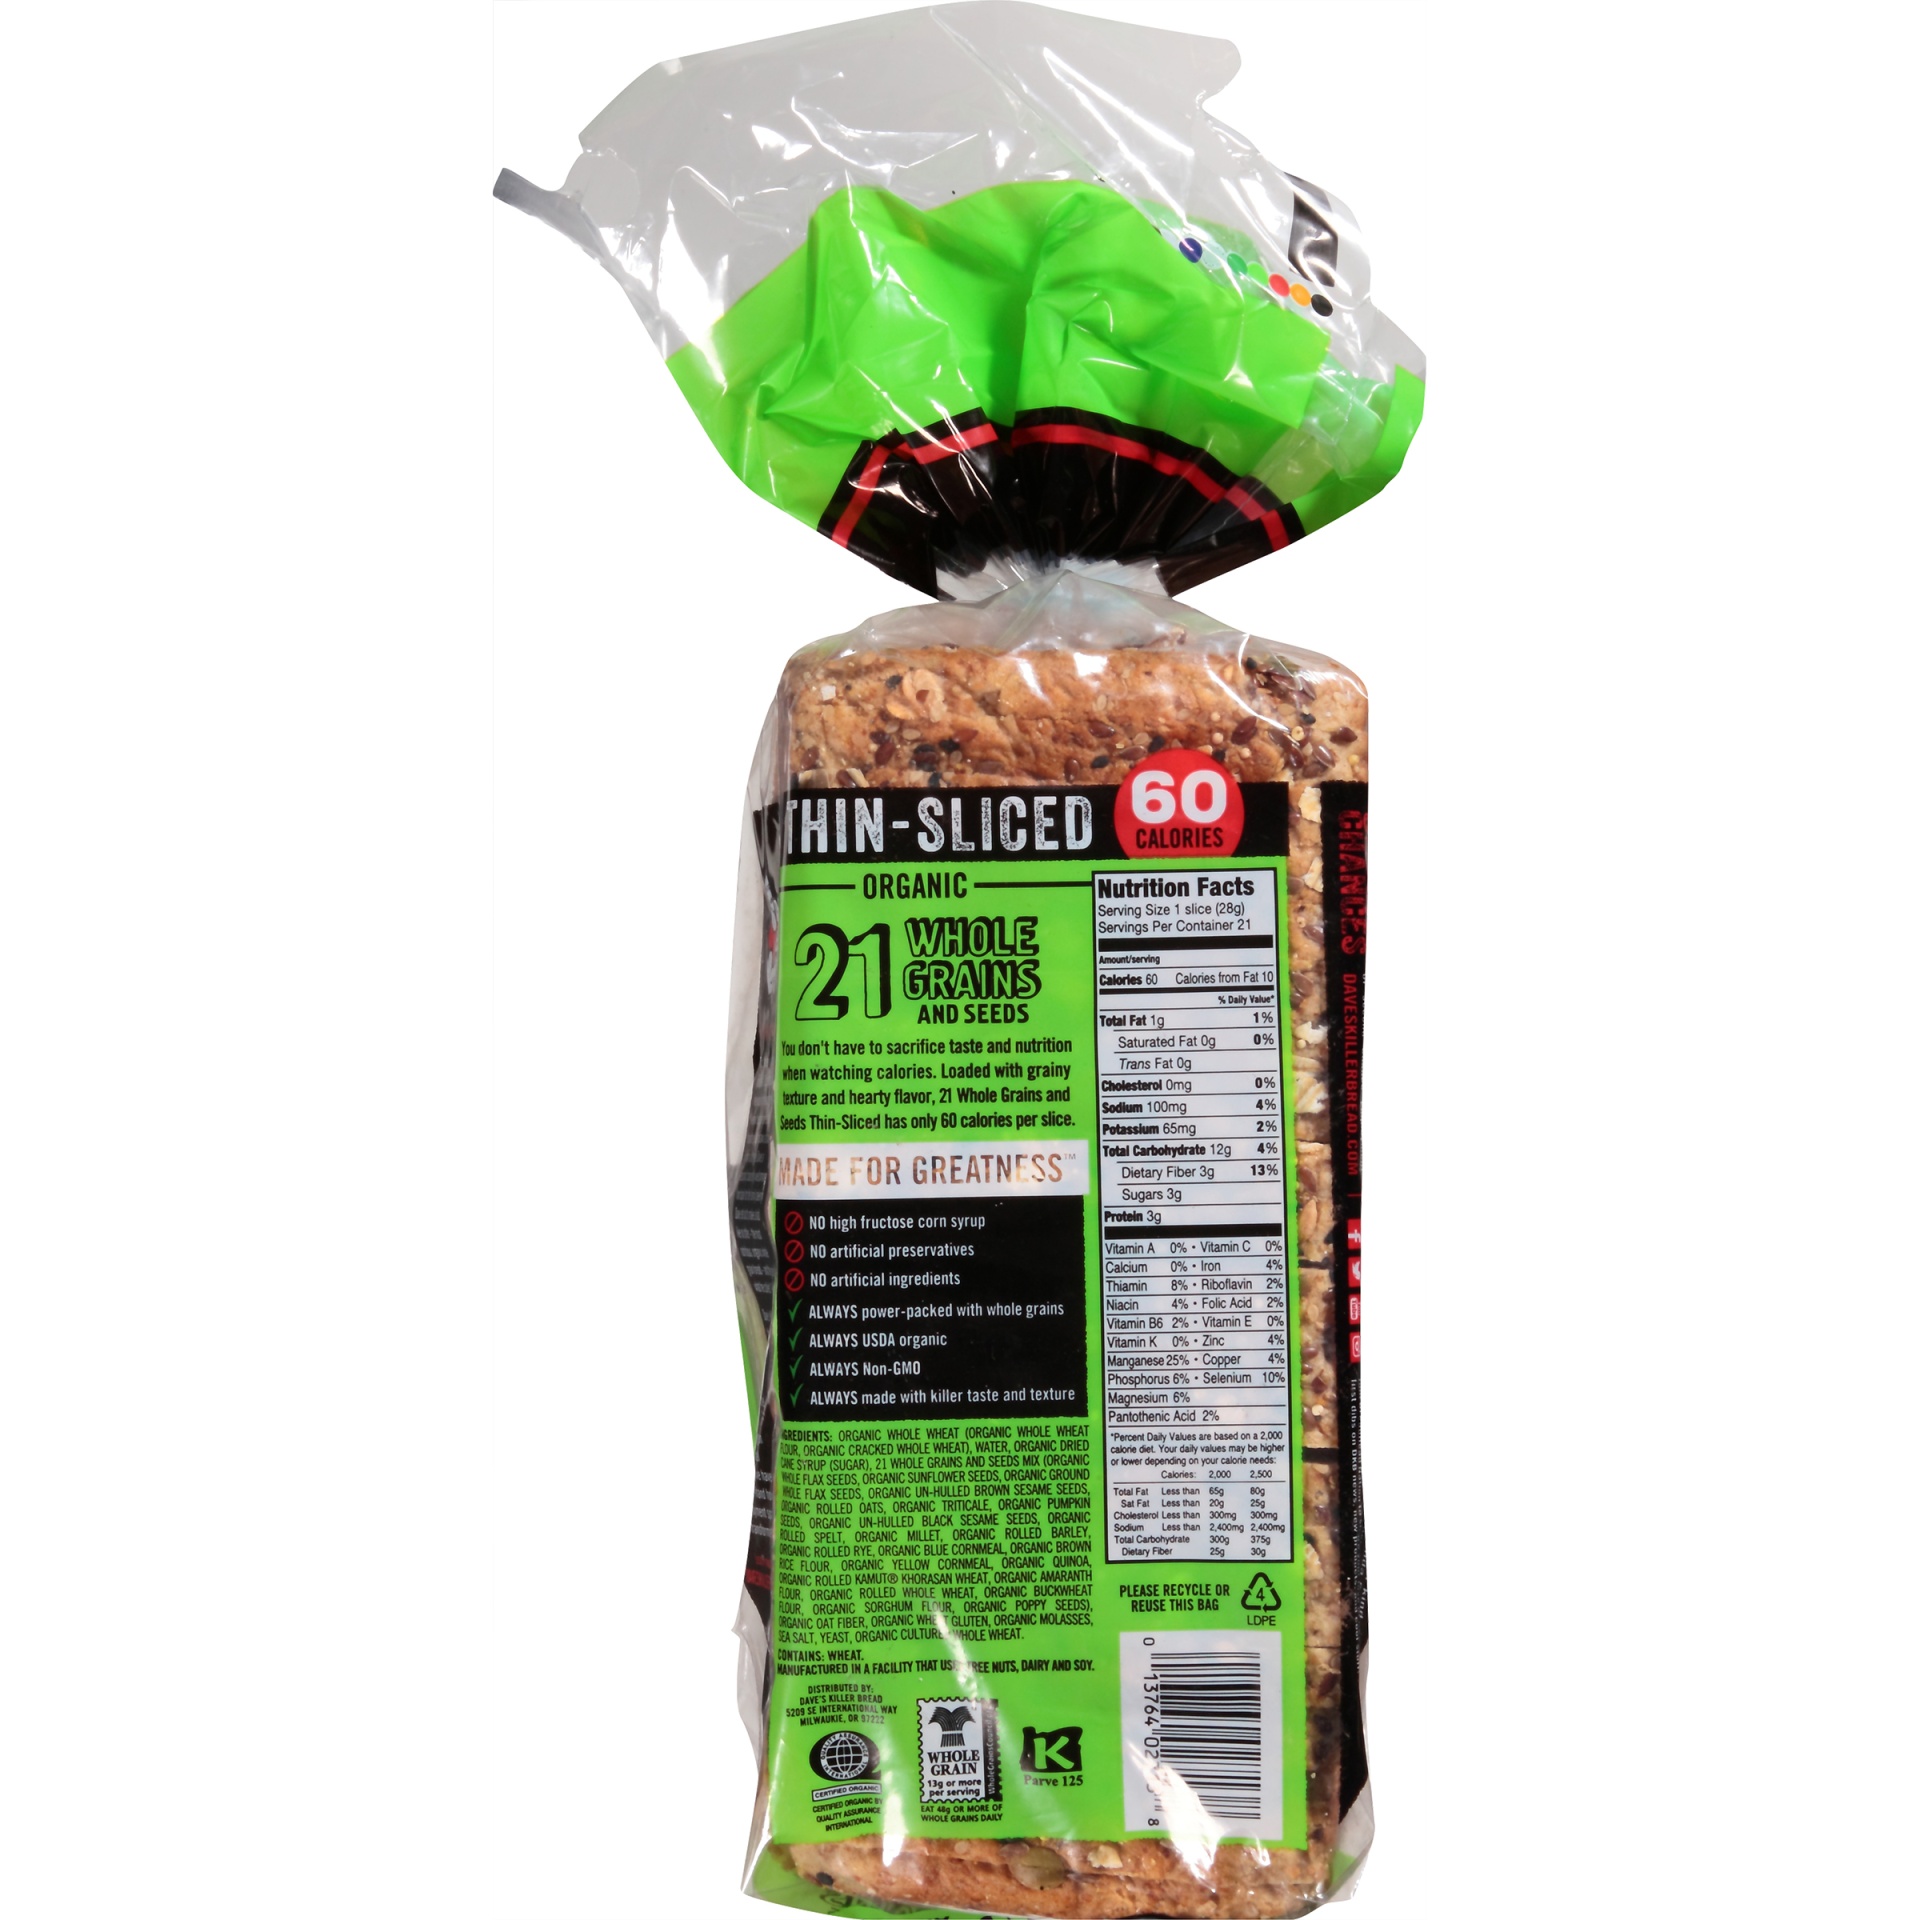 slide 6 of 8, Dave's Killer Bread® Thin-Sliced 21 Whole Grains and Seeds Organic Bread 20.5 oz. Bag, 20.5 oz